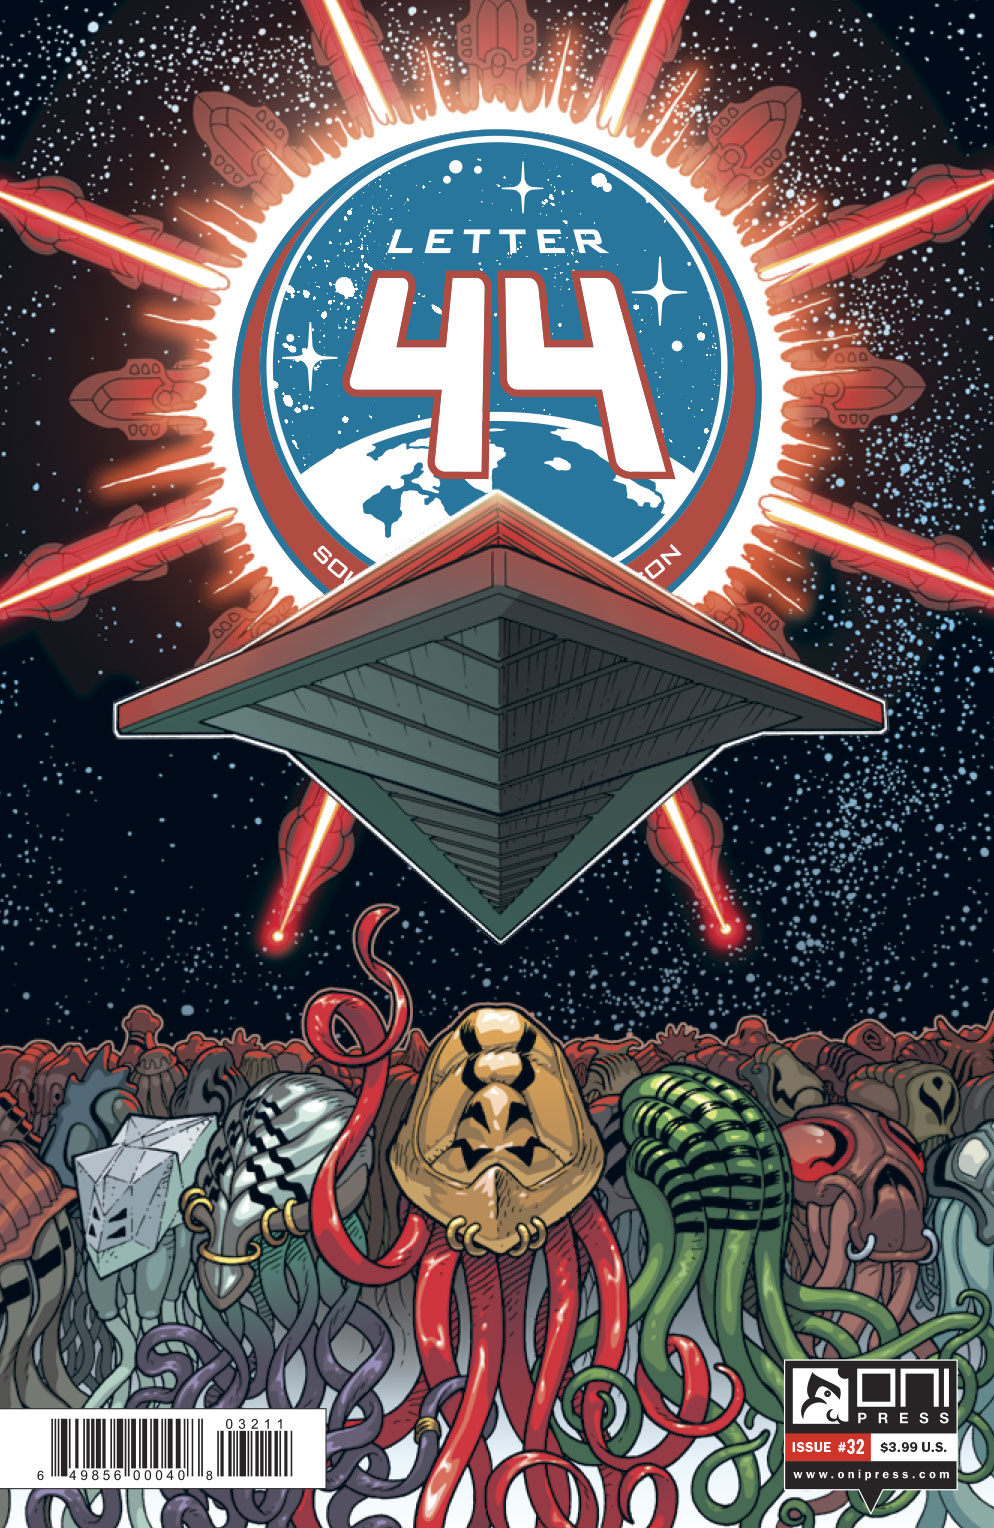 LETTER 44 #1 ScyFy TV Show Oni Press Sold Out 1st Print Near Mint to NM 2013